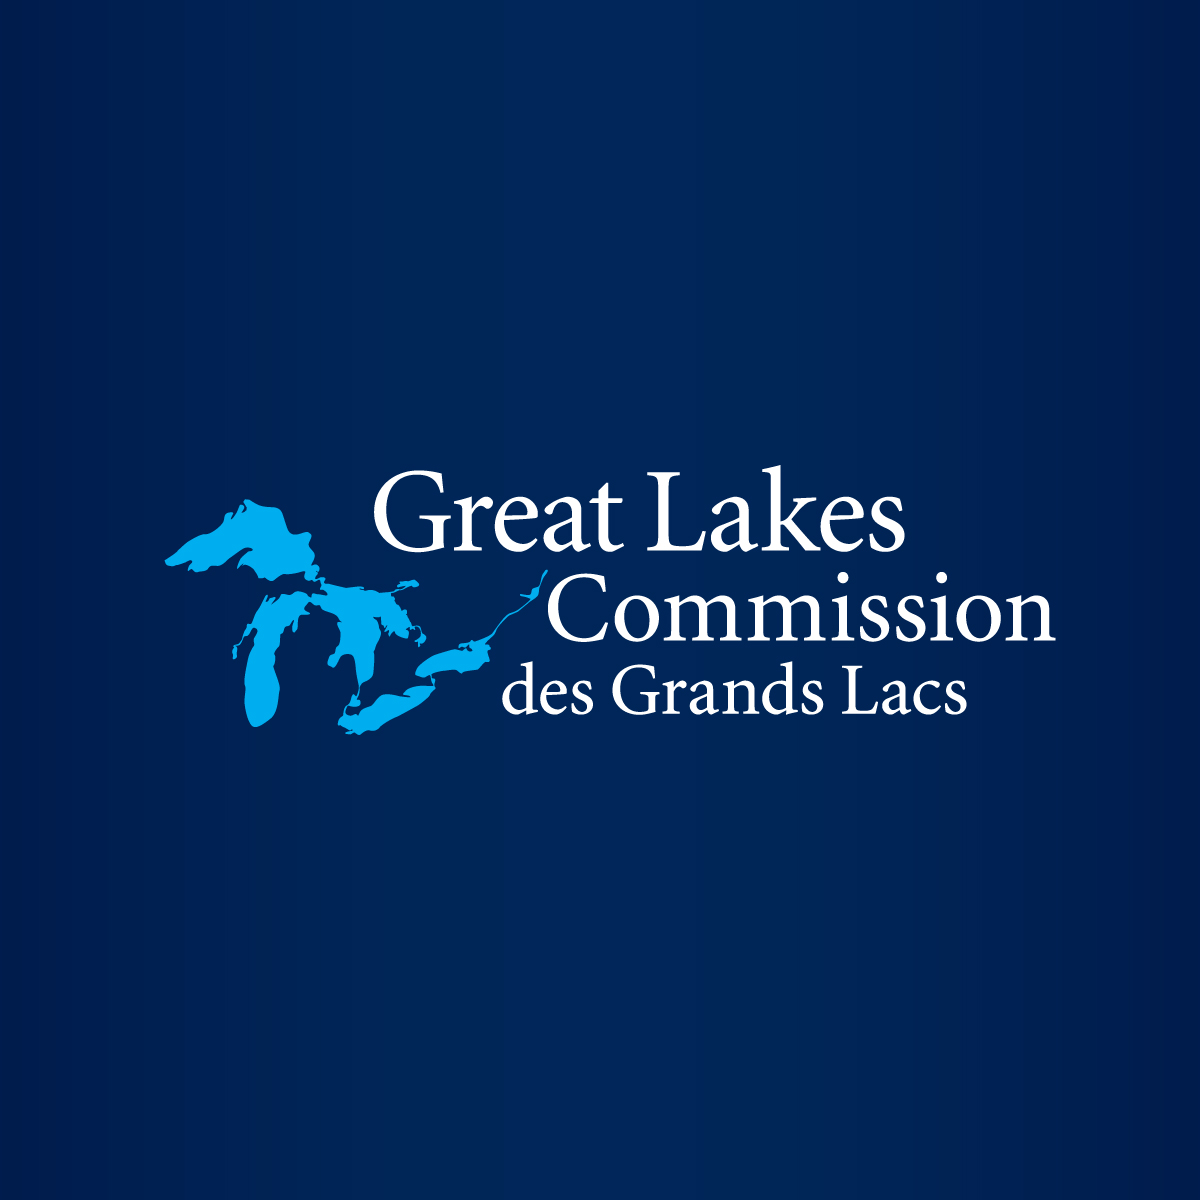 Industries and public water supplies top the list of main consumers of Great Lakes water